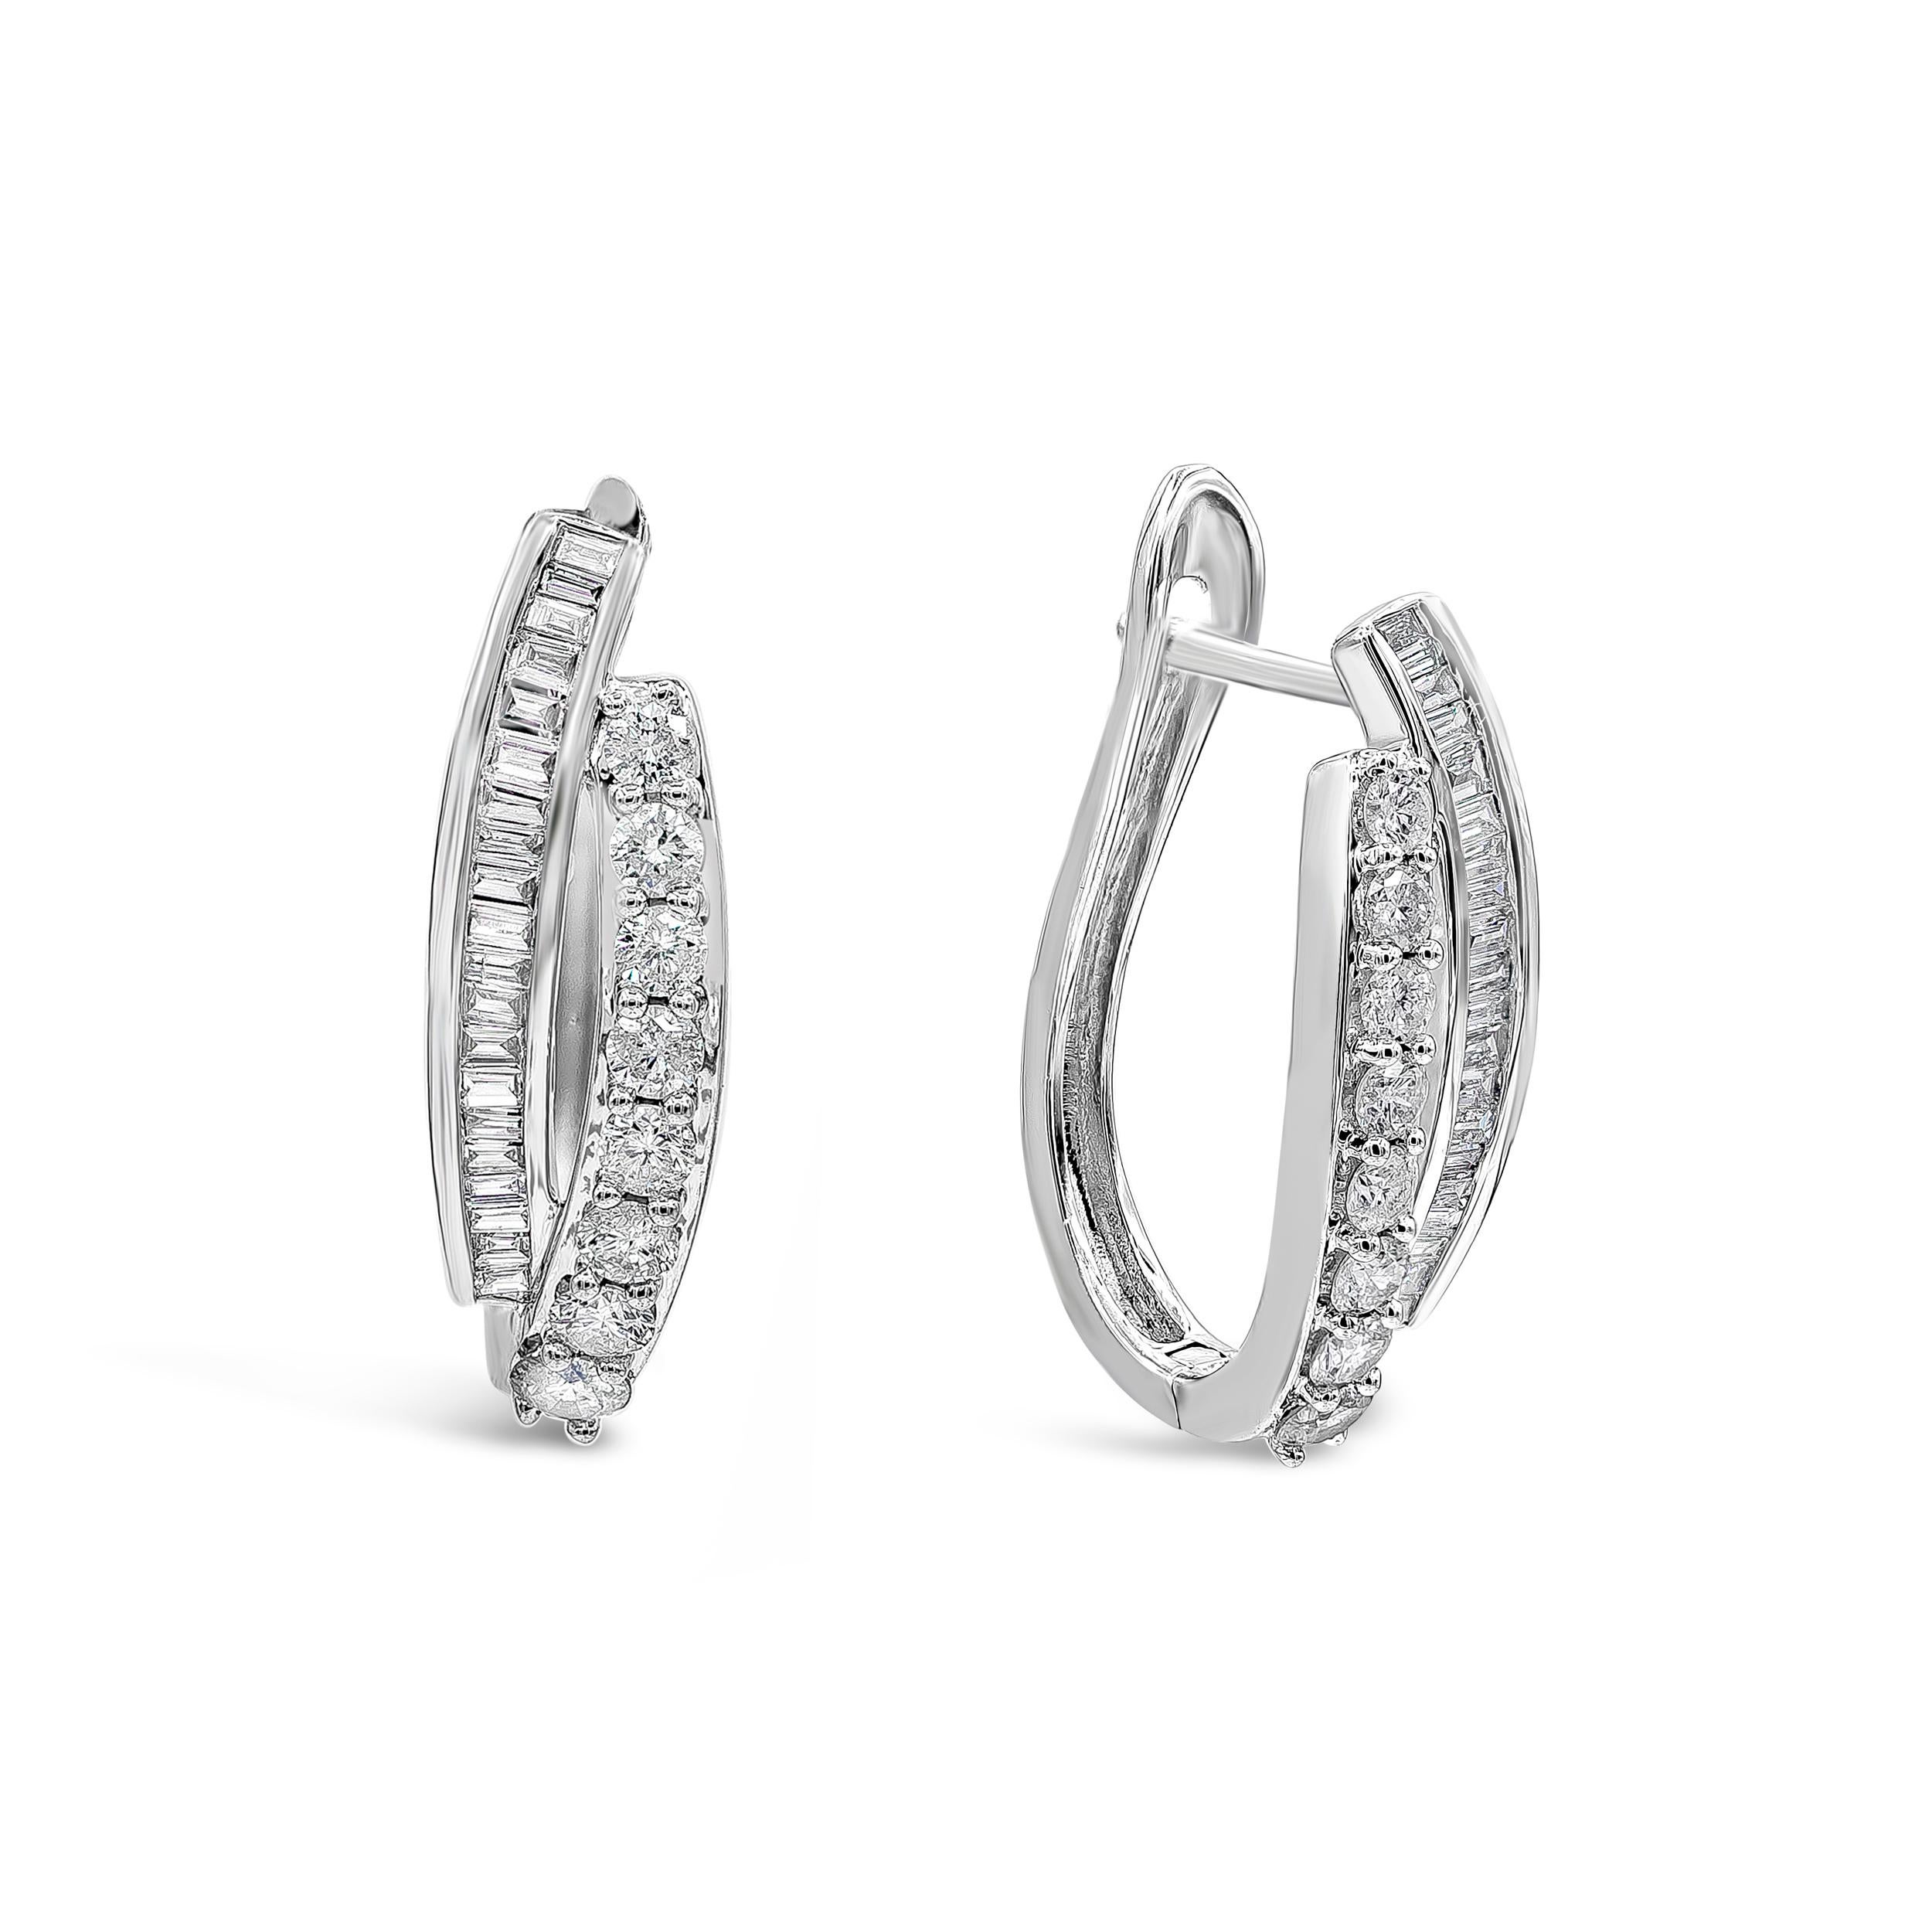 Contemporary 1.34 Carats Total Round and Baguette Cut Diamond Hoop Earrings